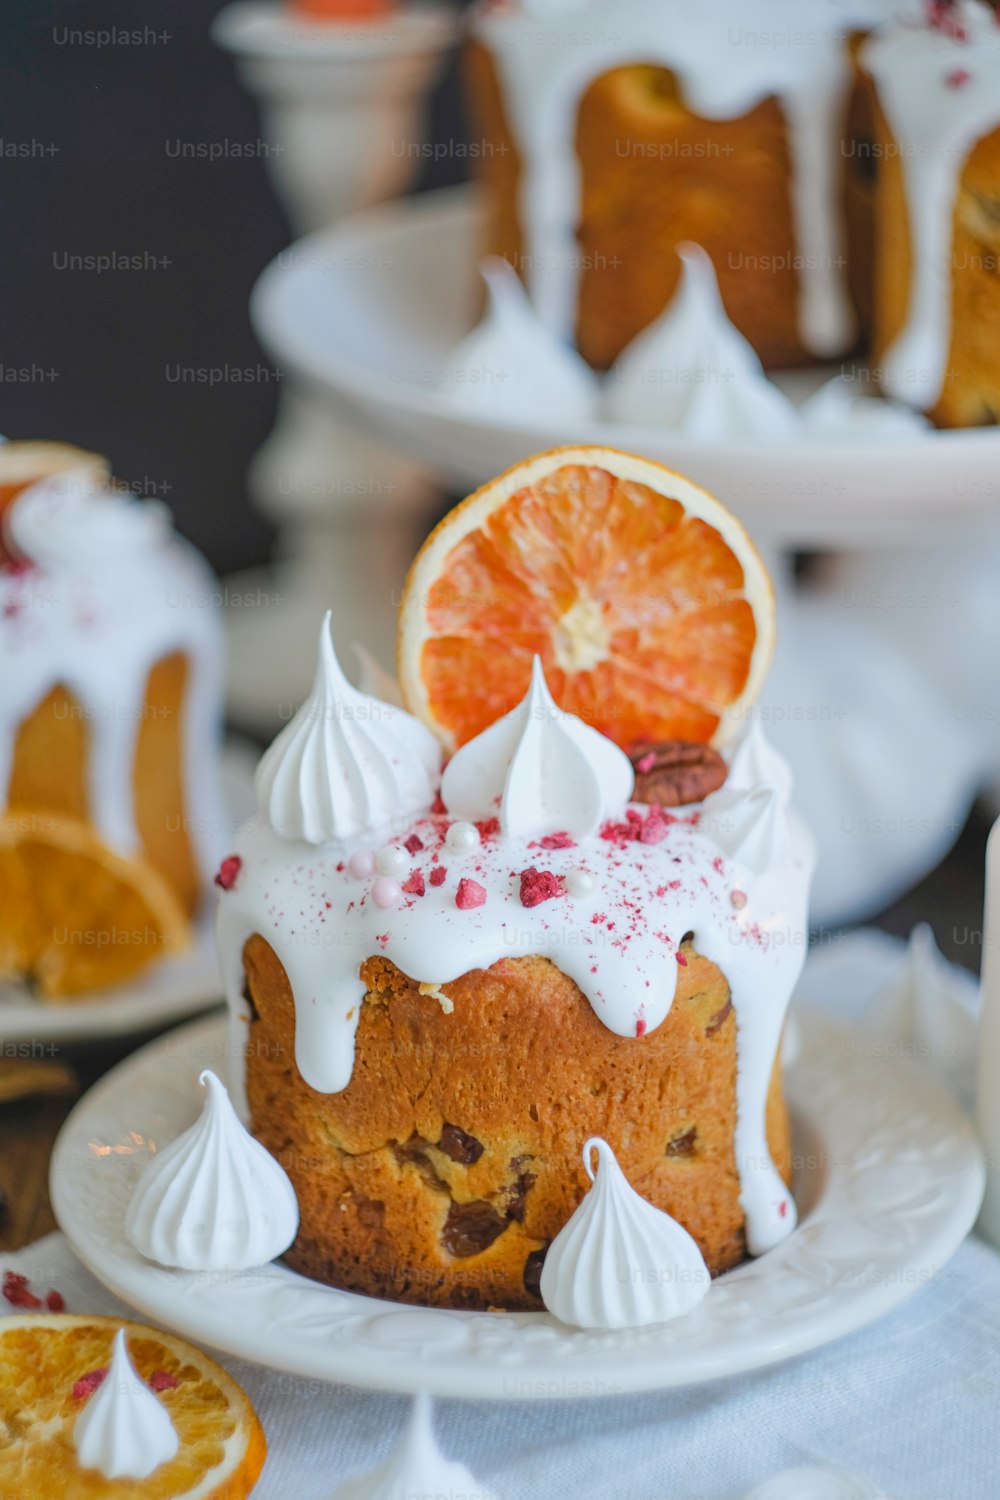 999+ Homemade Cake Pictures | Download Free Images on Unsplash